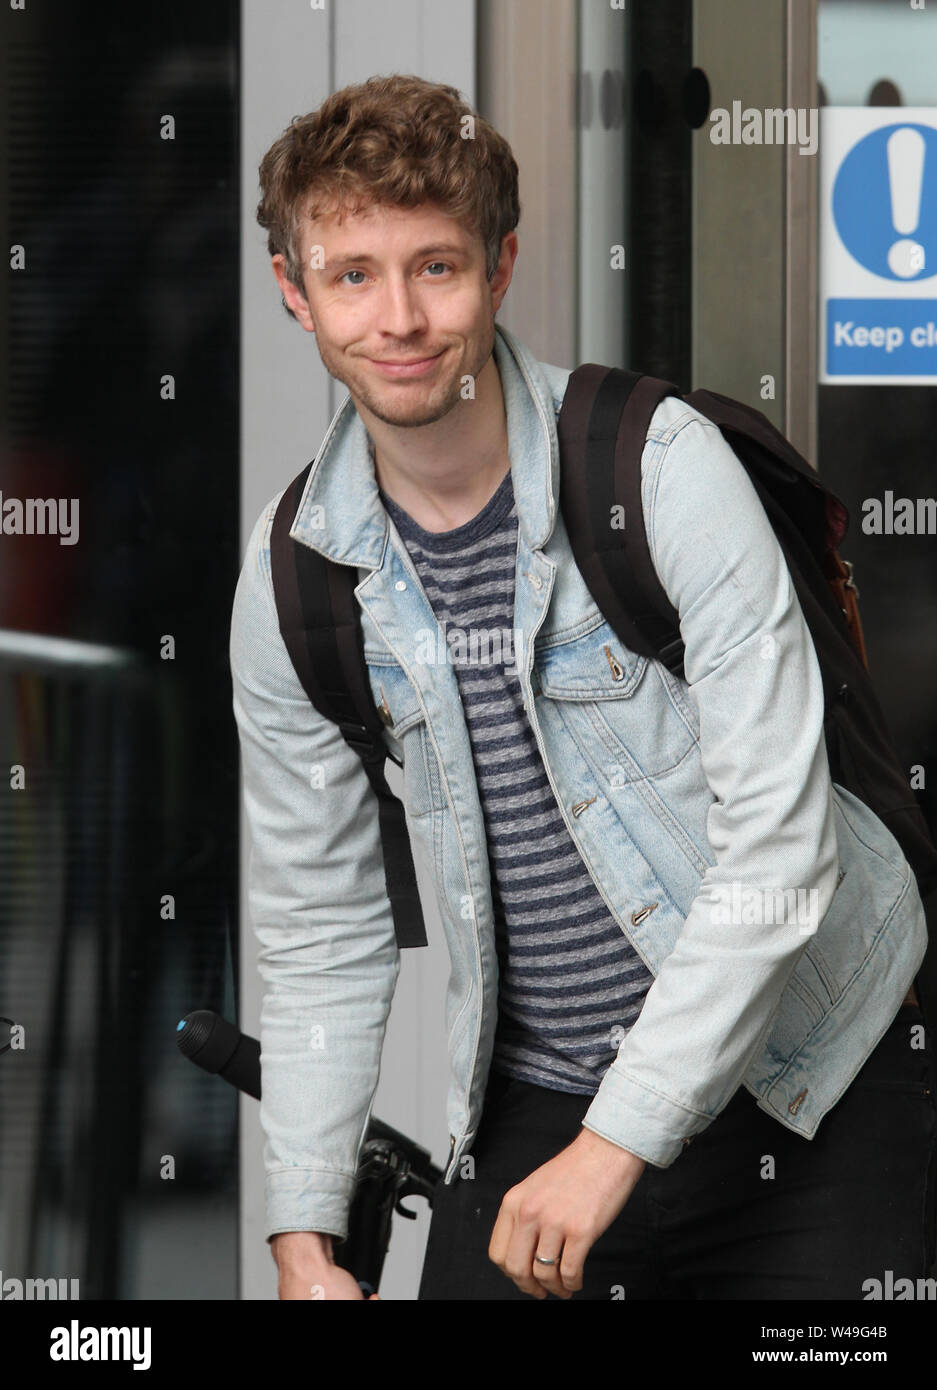 London, UK, 21th July 2019. Matt Edmondson seen with his scooter at the BBC Broadcasting House studios Credit: WFPA/Alamy Live News Stock Photo